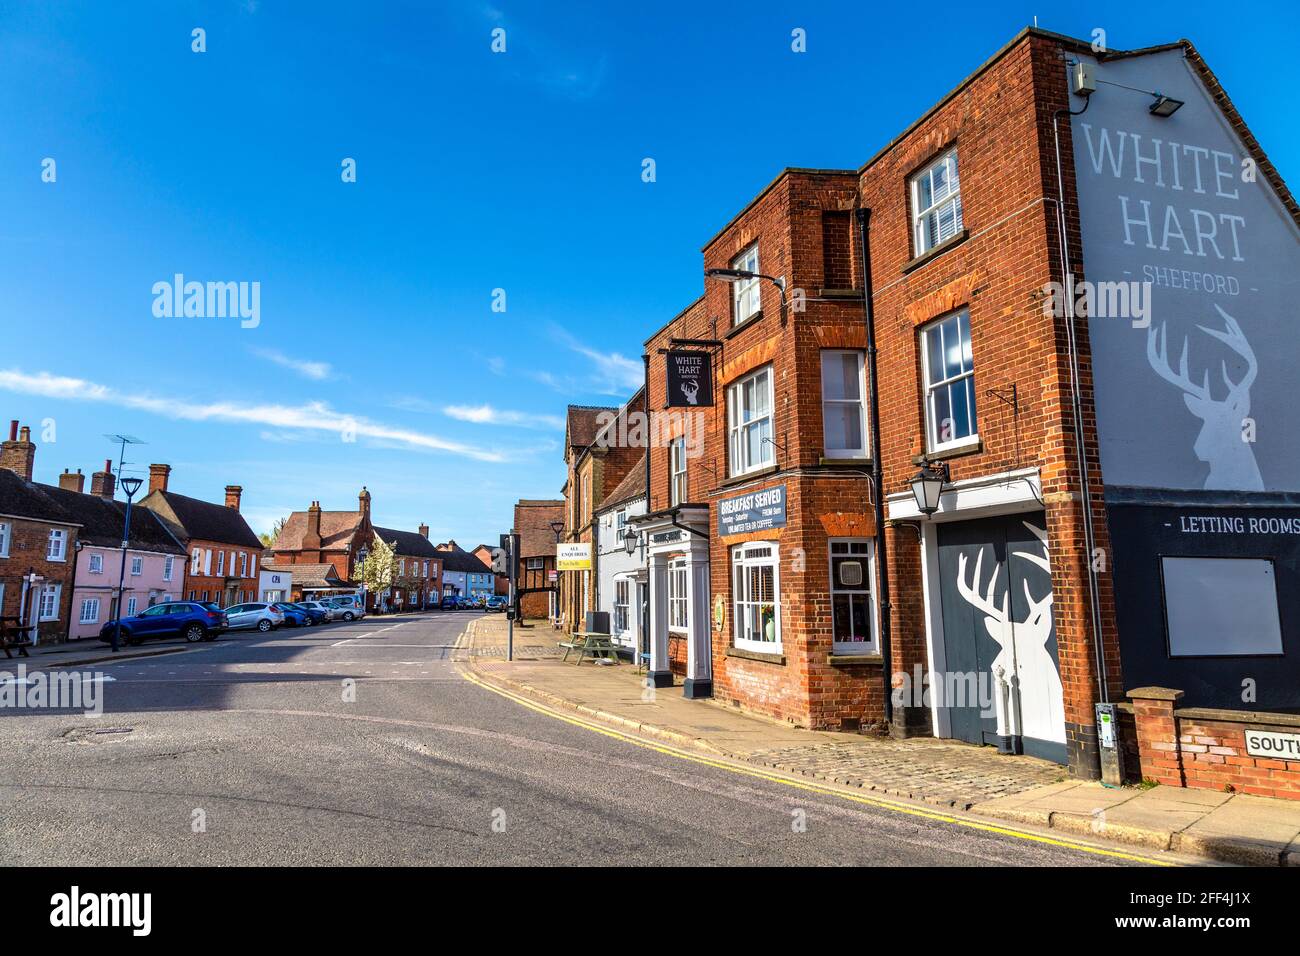 The White Hart Hotel and Northbridge Street in Shefford, Bedfordshire, UK Stock Photo